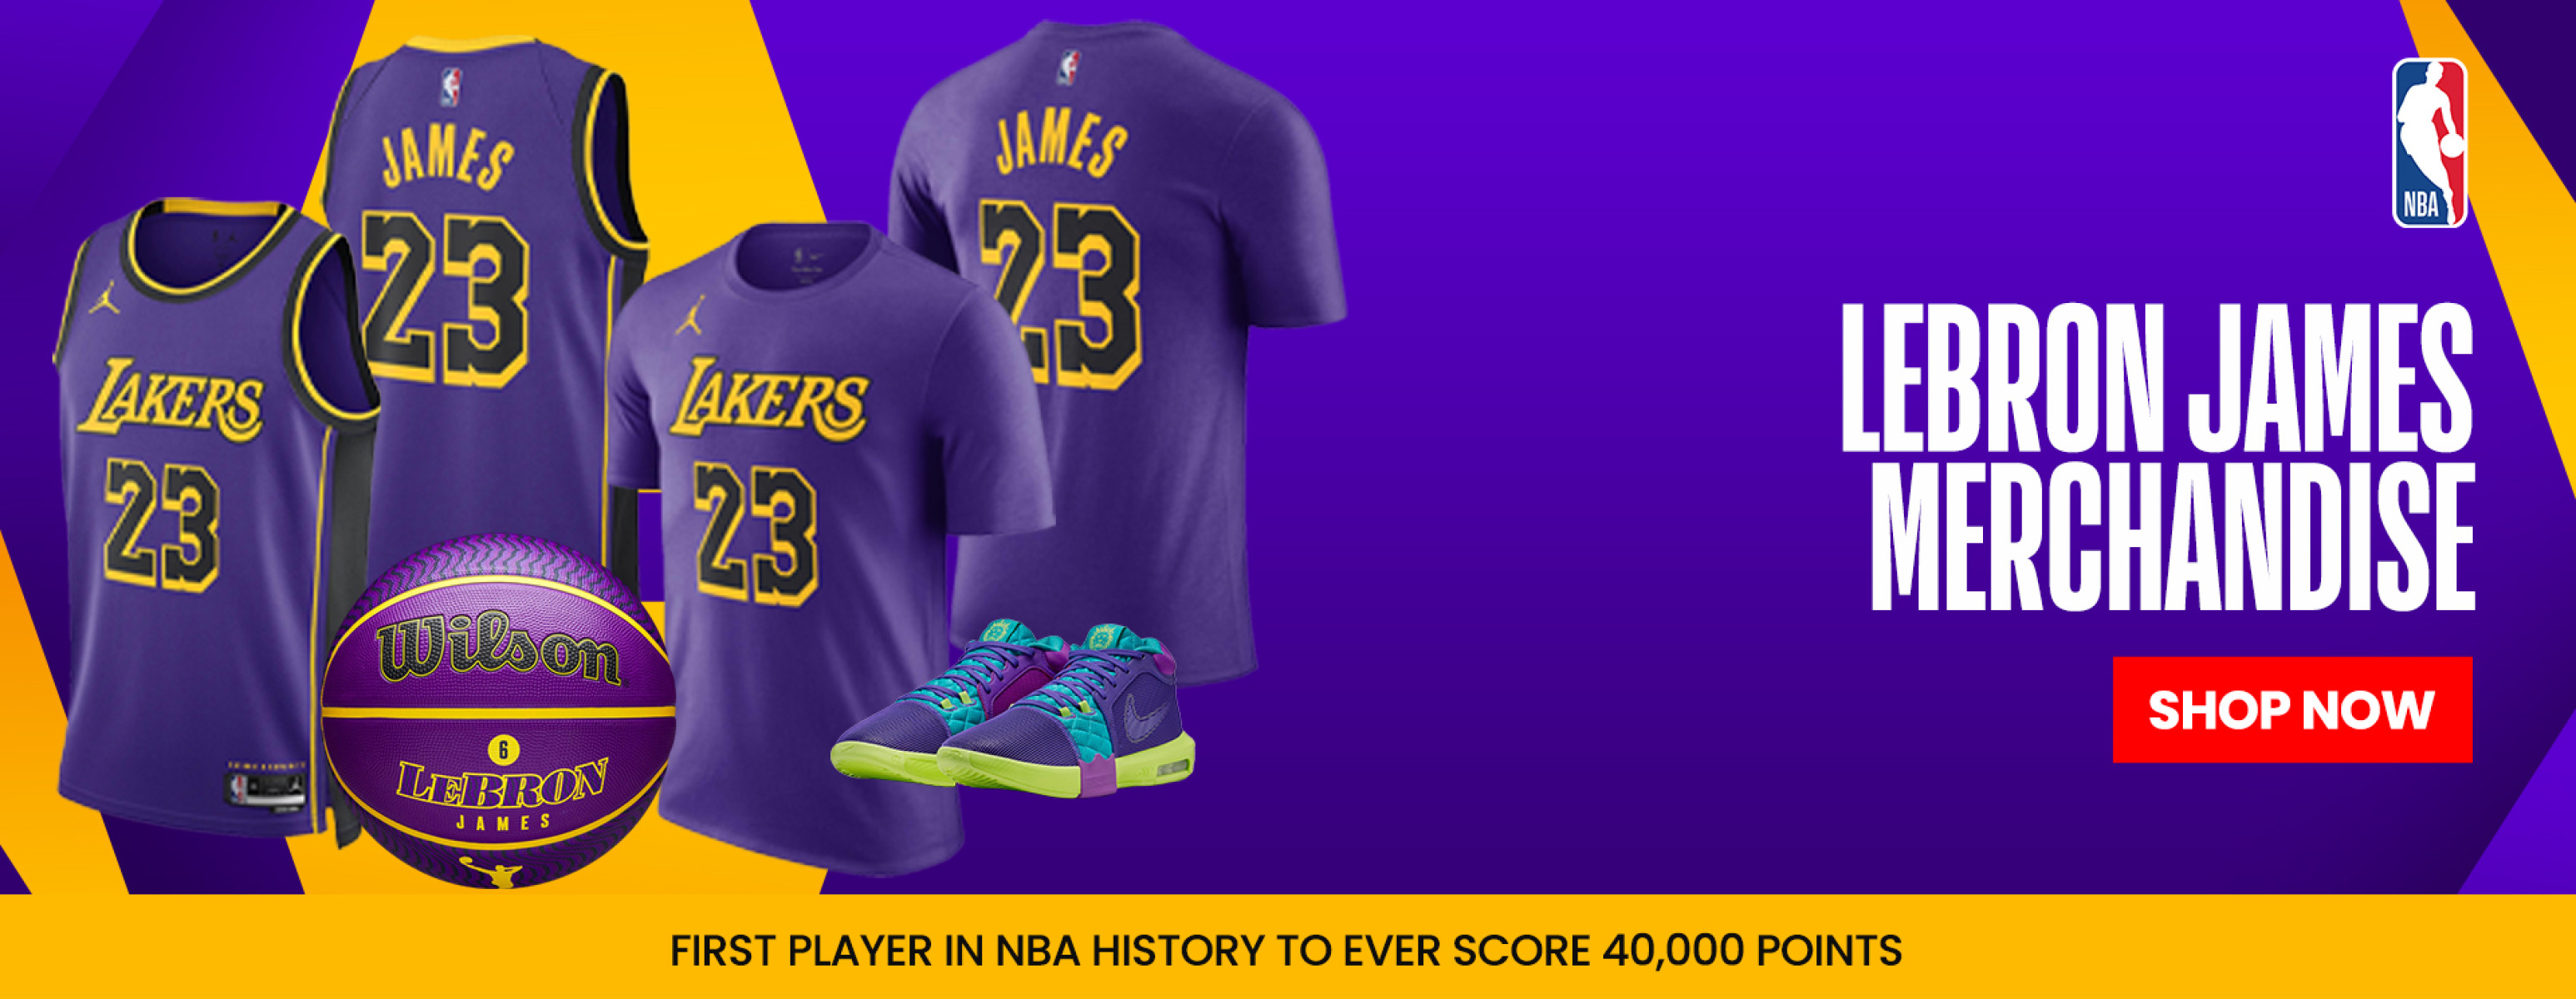 NBA Gear. Find Clothes, Shoes, NBA Accessories for Men, Women & Kids, Stock, Offers